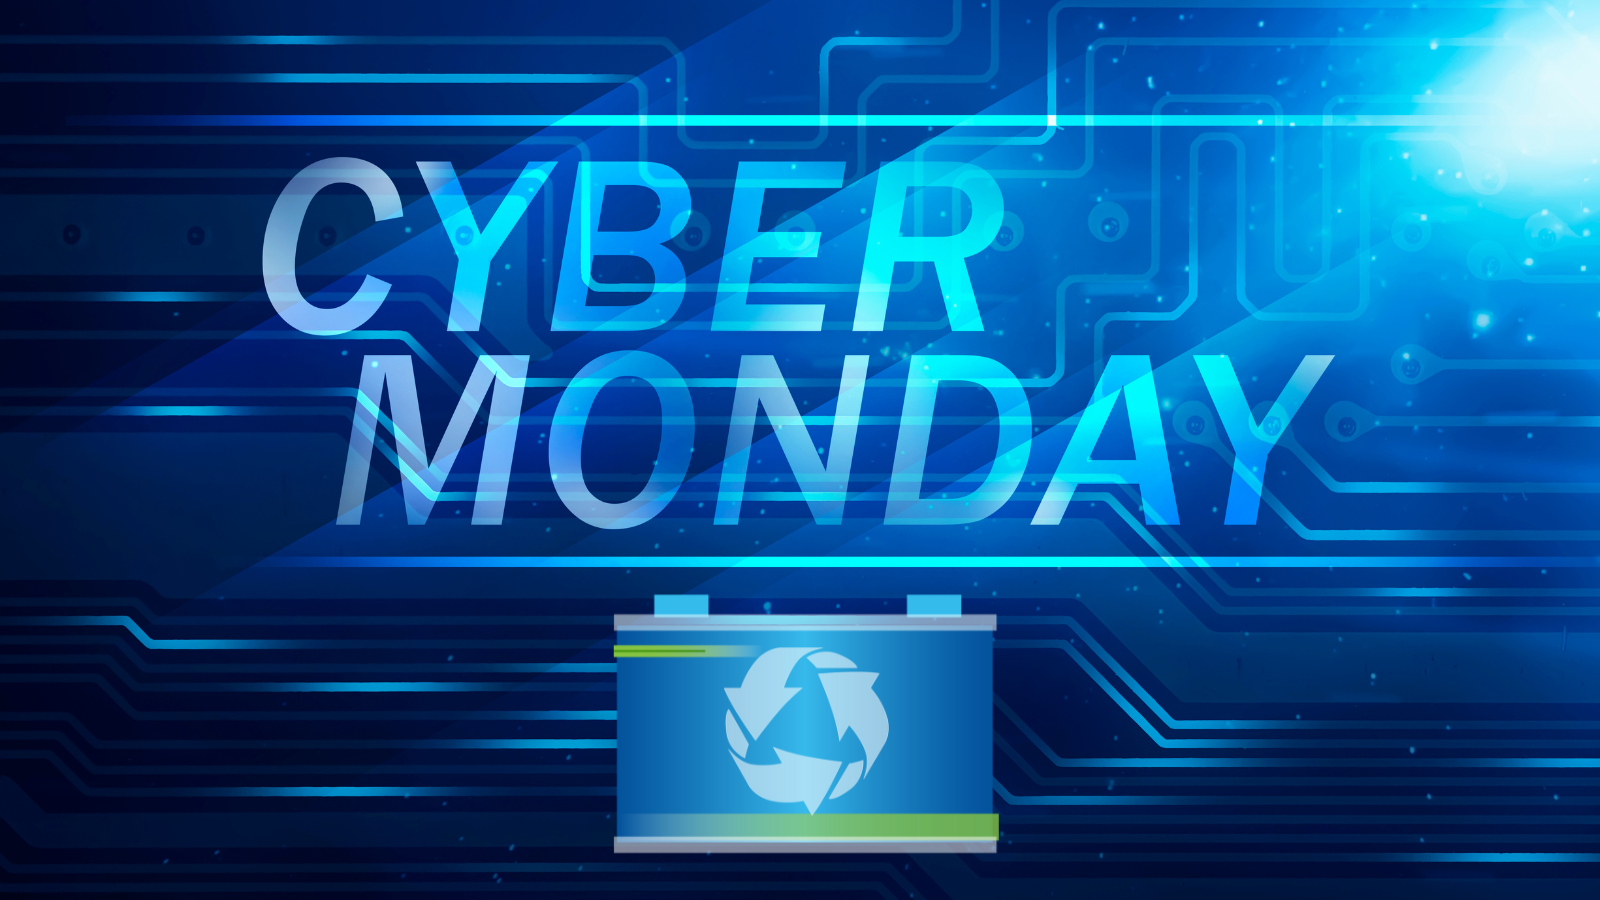 Lead Batteries: Energizing Cyber Monday | Battery Council International